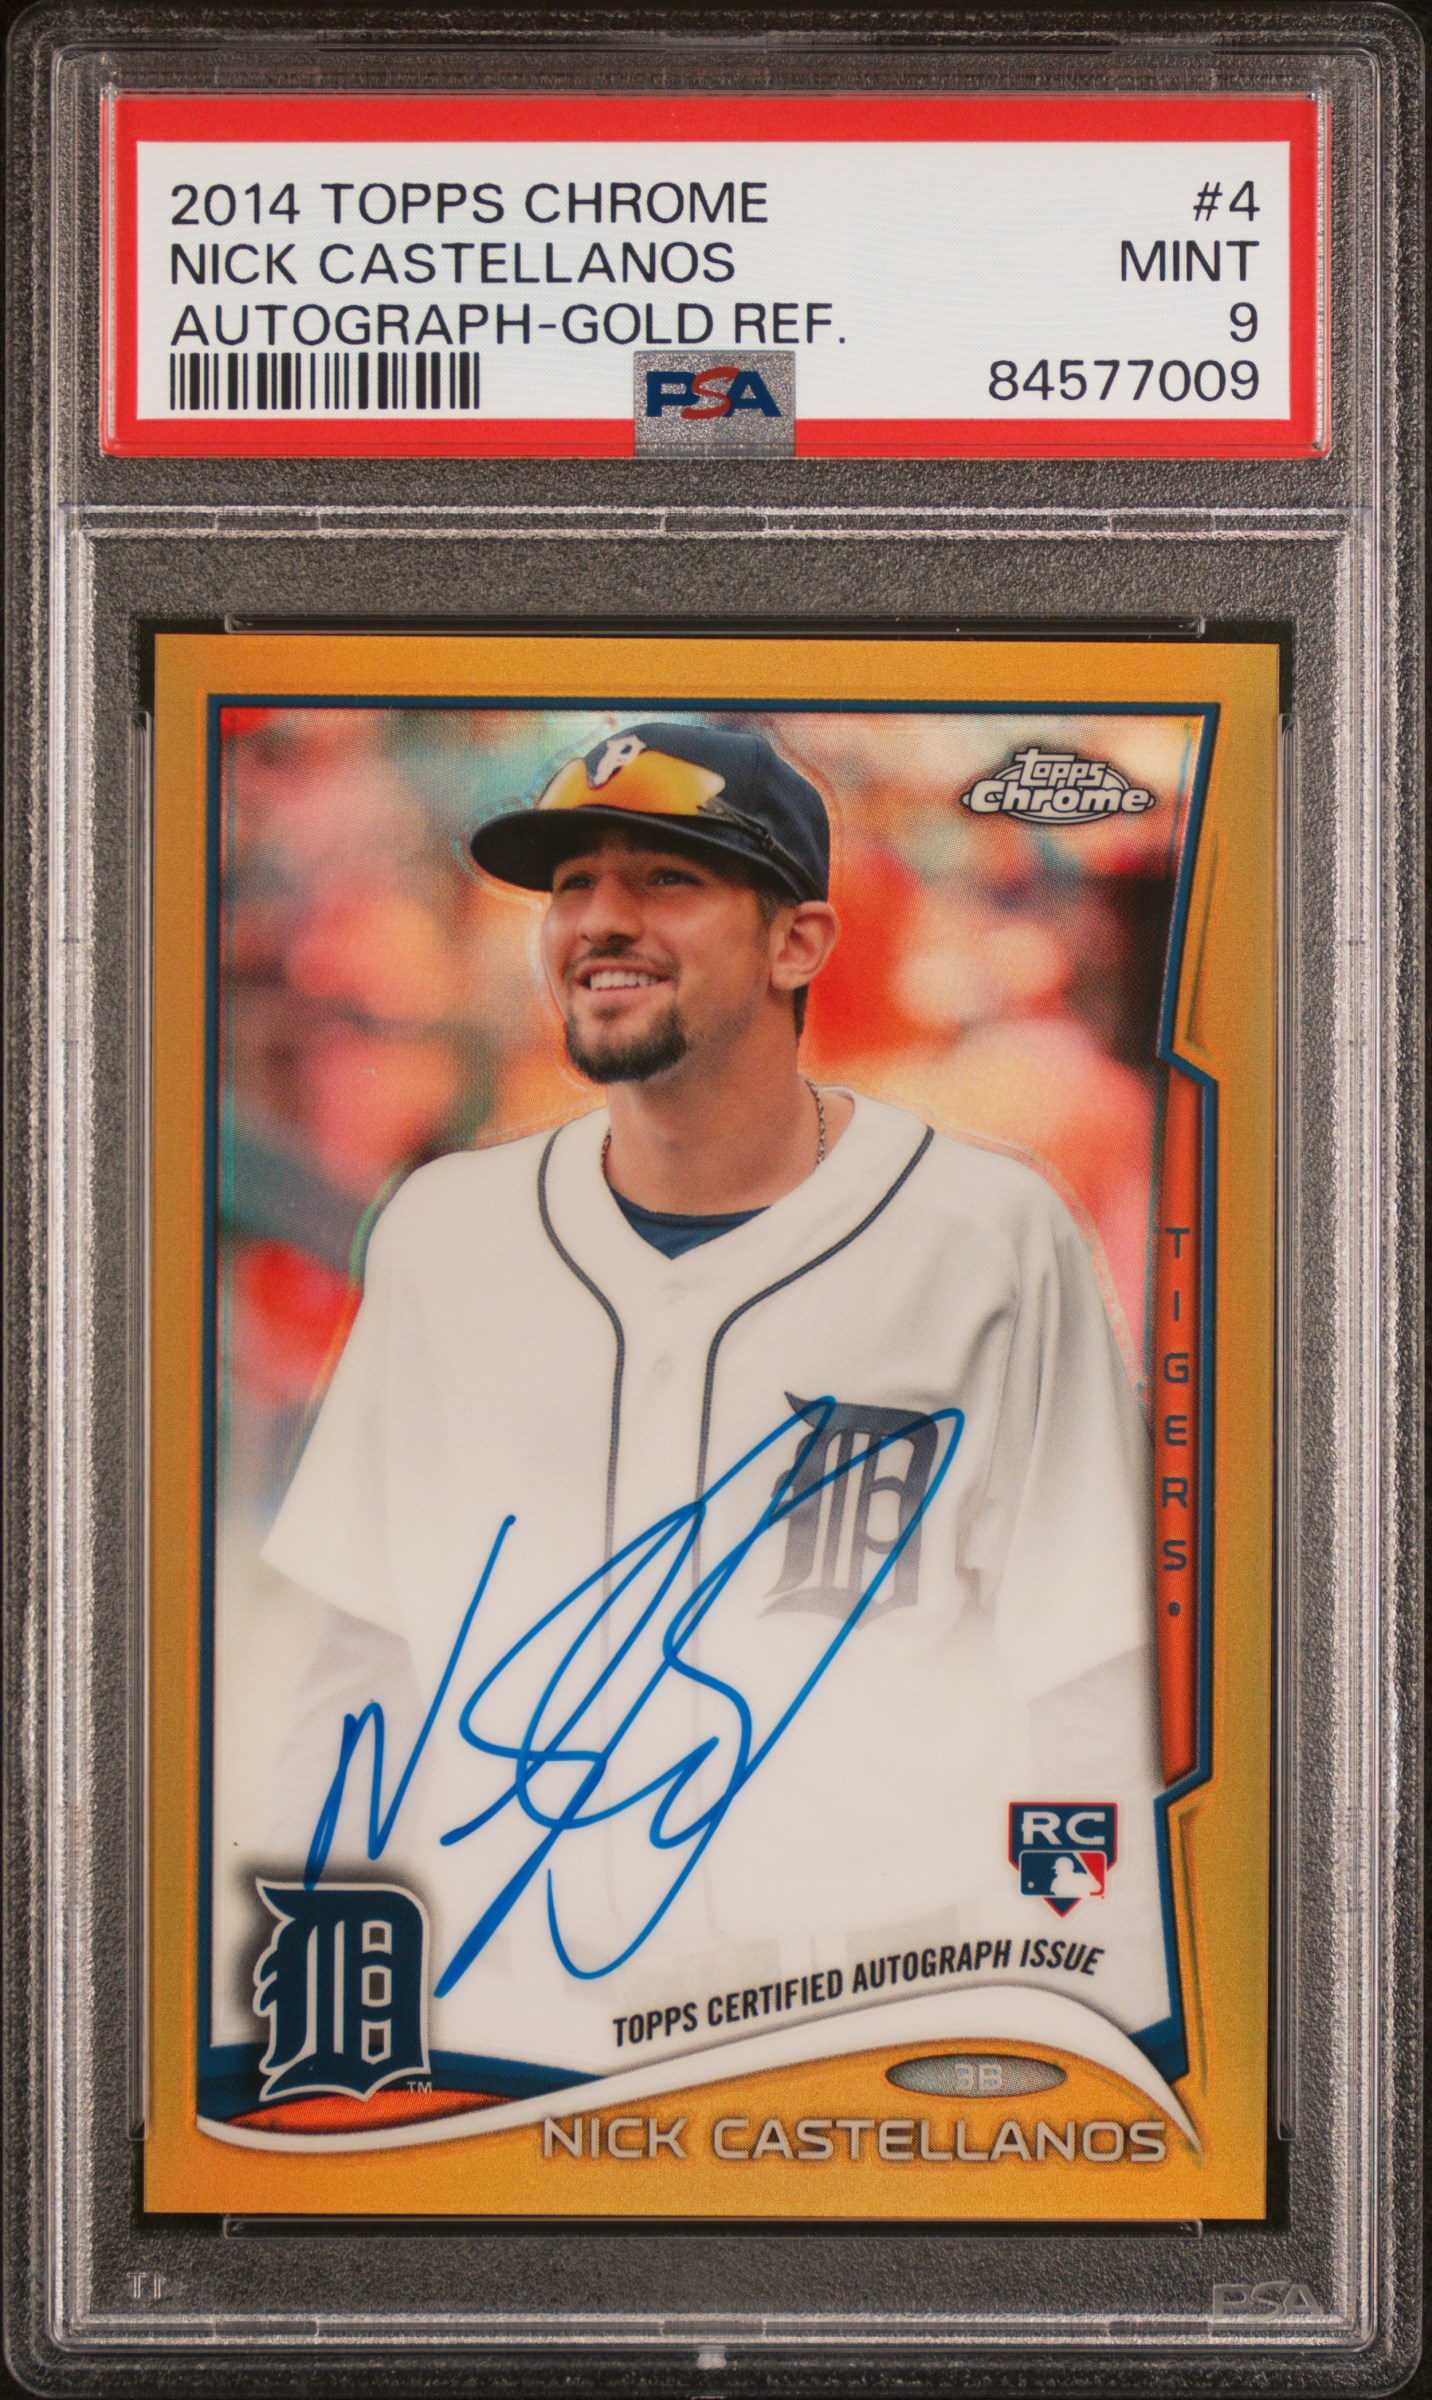 2014 Topps Chrome Autograph-Gold Refractor #4 Nick Castellanos Signed Rookie Card (#39/50) – PSA MINT 9